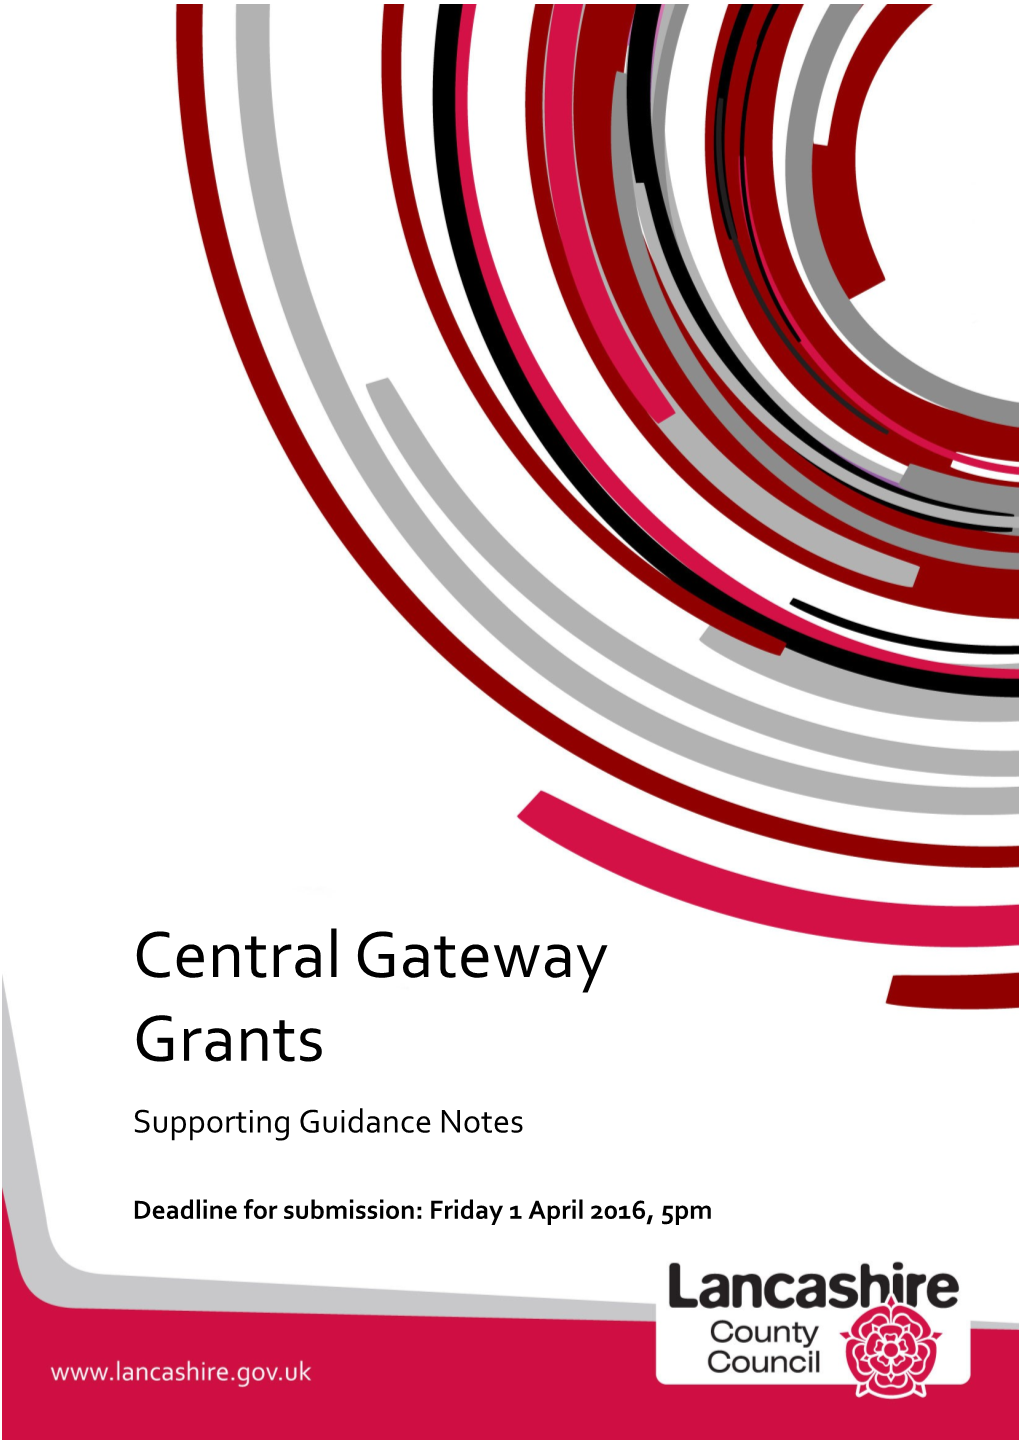 These Supporting Guidance Notes Are to Help You Understand What the Central Gateway Grants